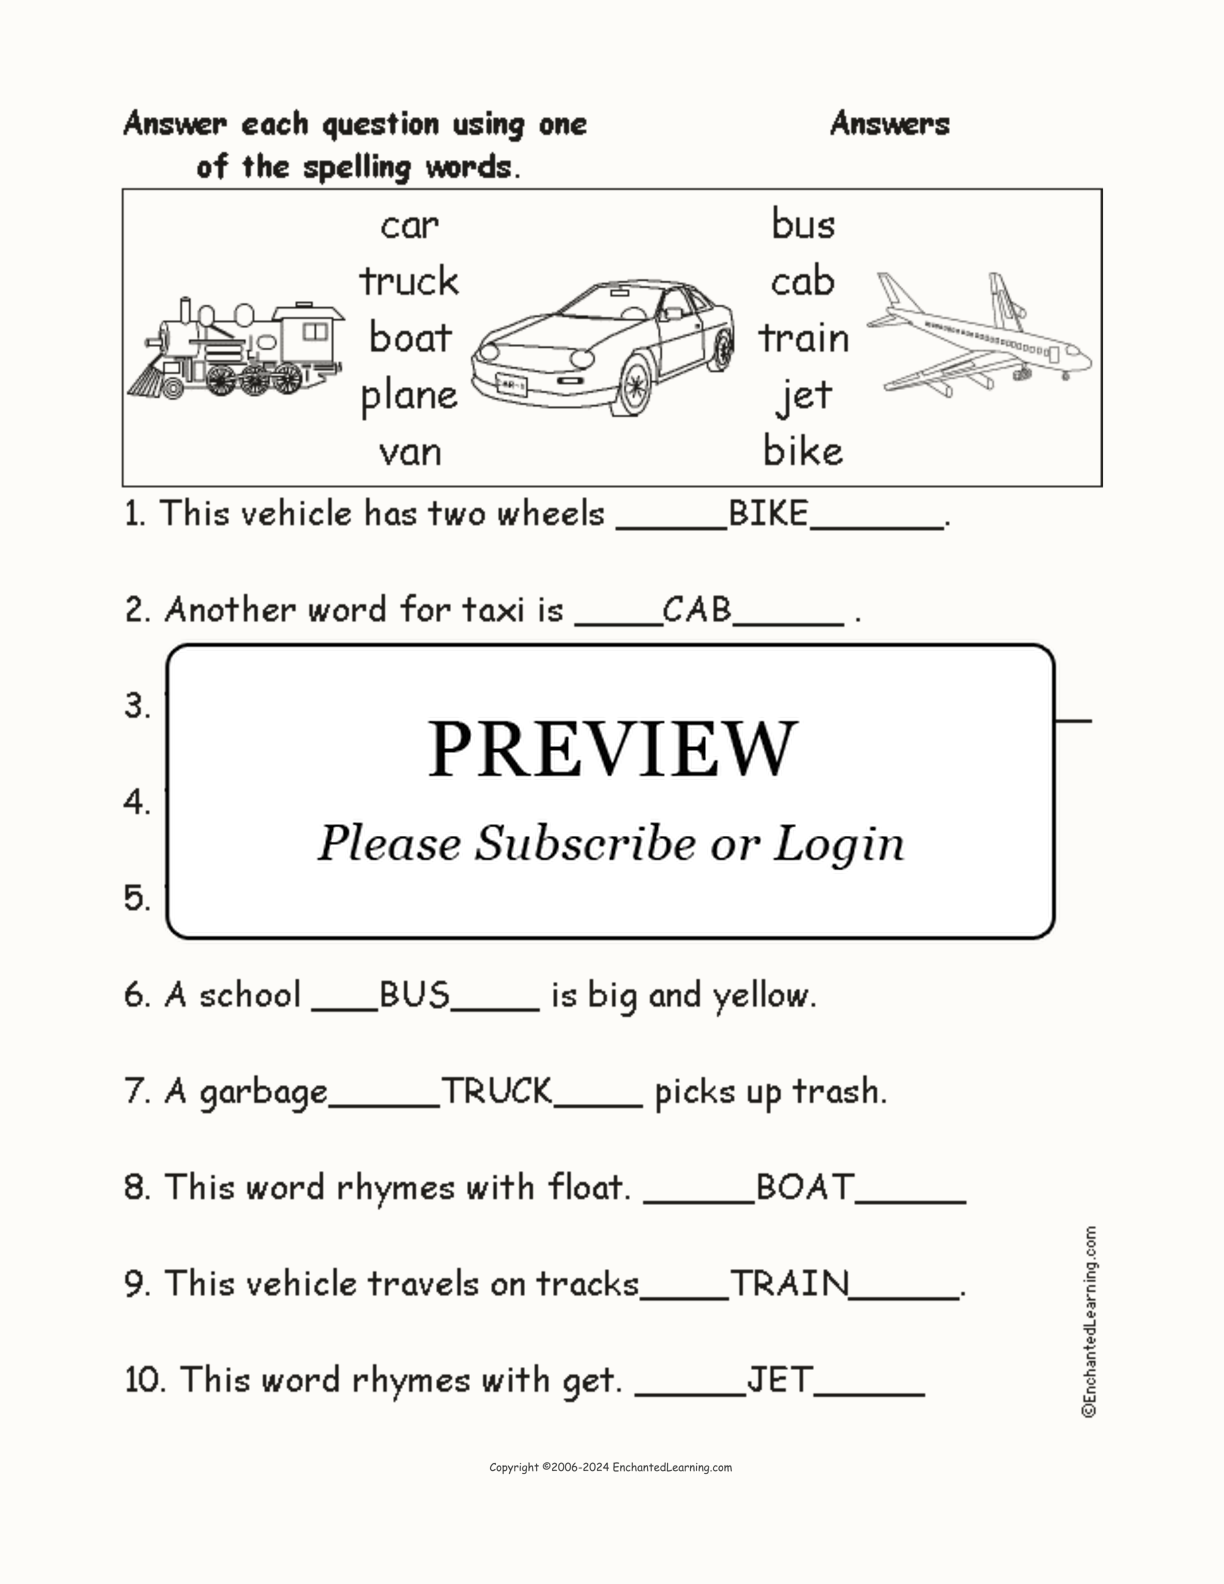 Vehicles Spelling Word Questions interactive worksheet page 2